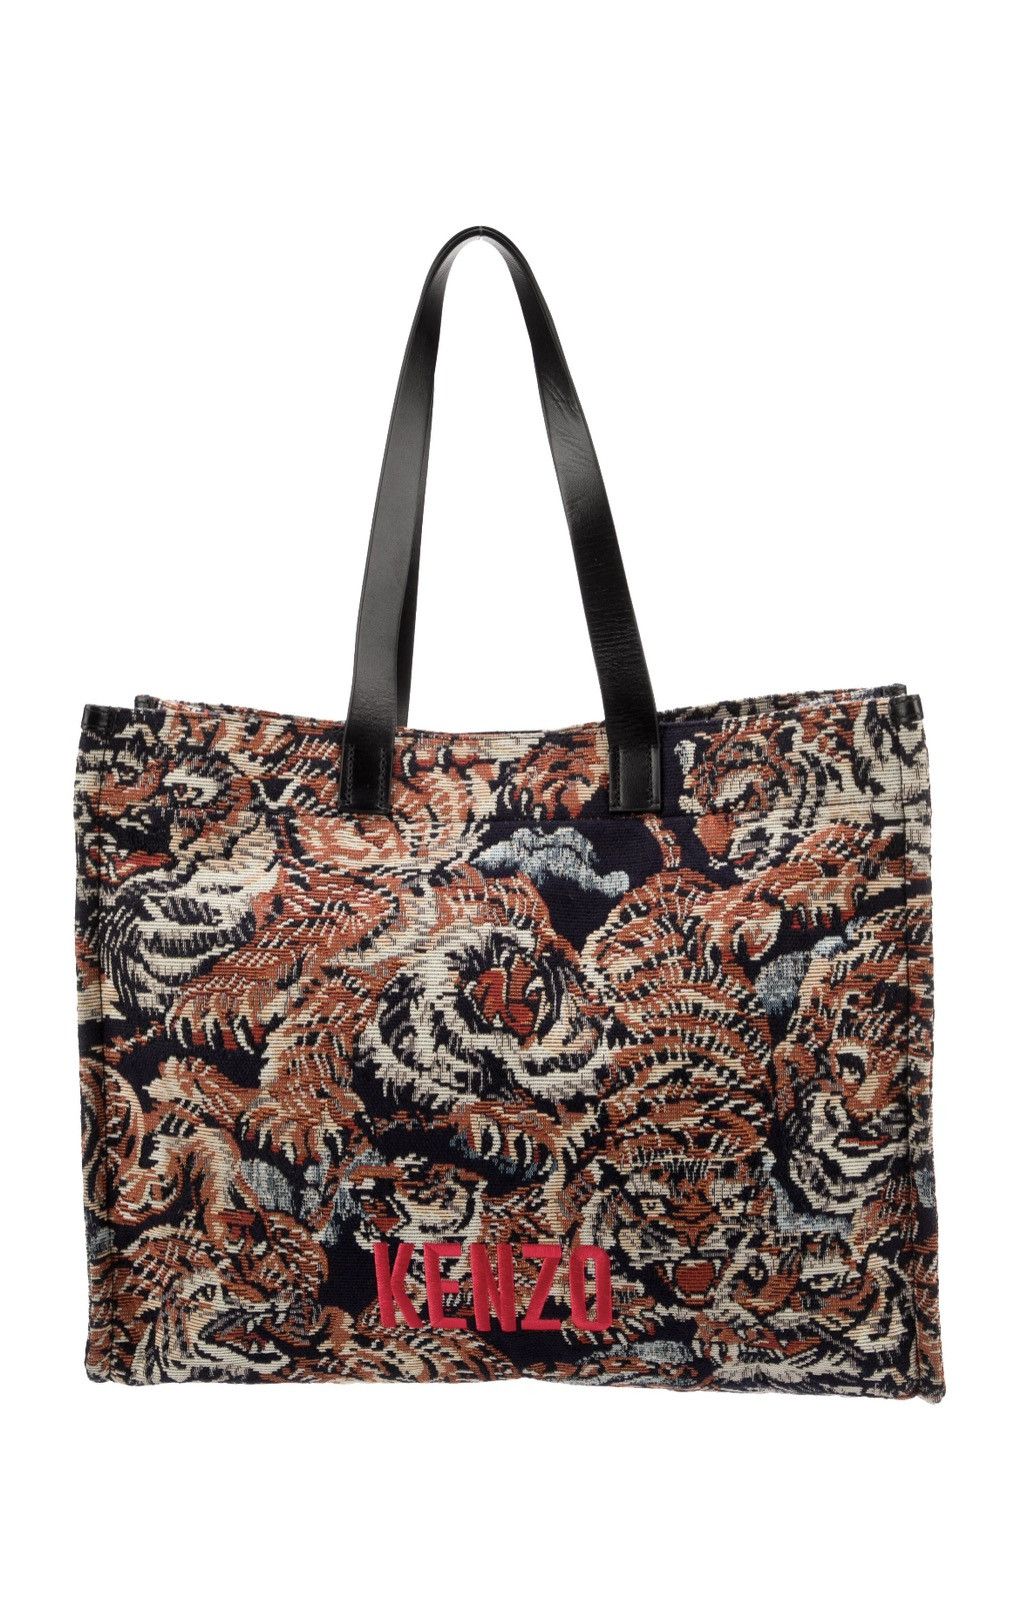 Kenzo KENZO Canvas Tapestry Tiger Tote Size ONE SIZE - 1 Preview